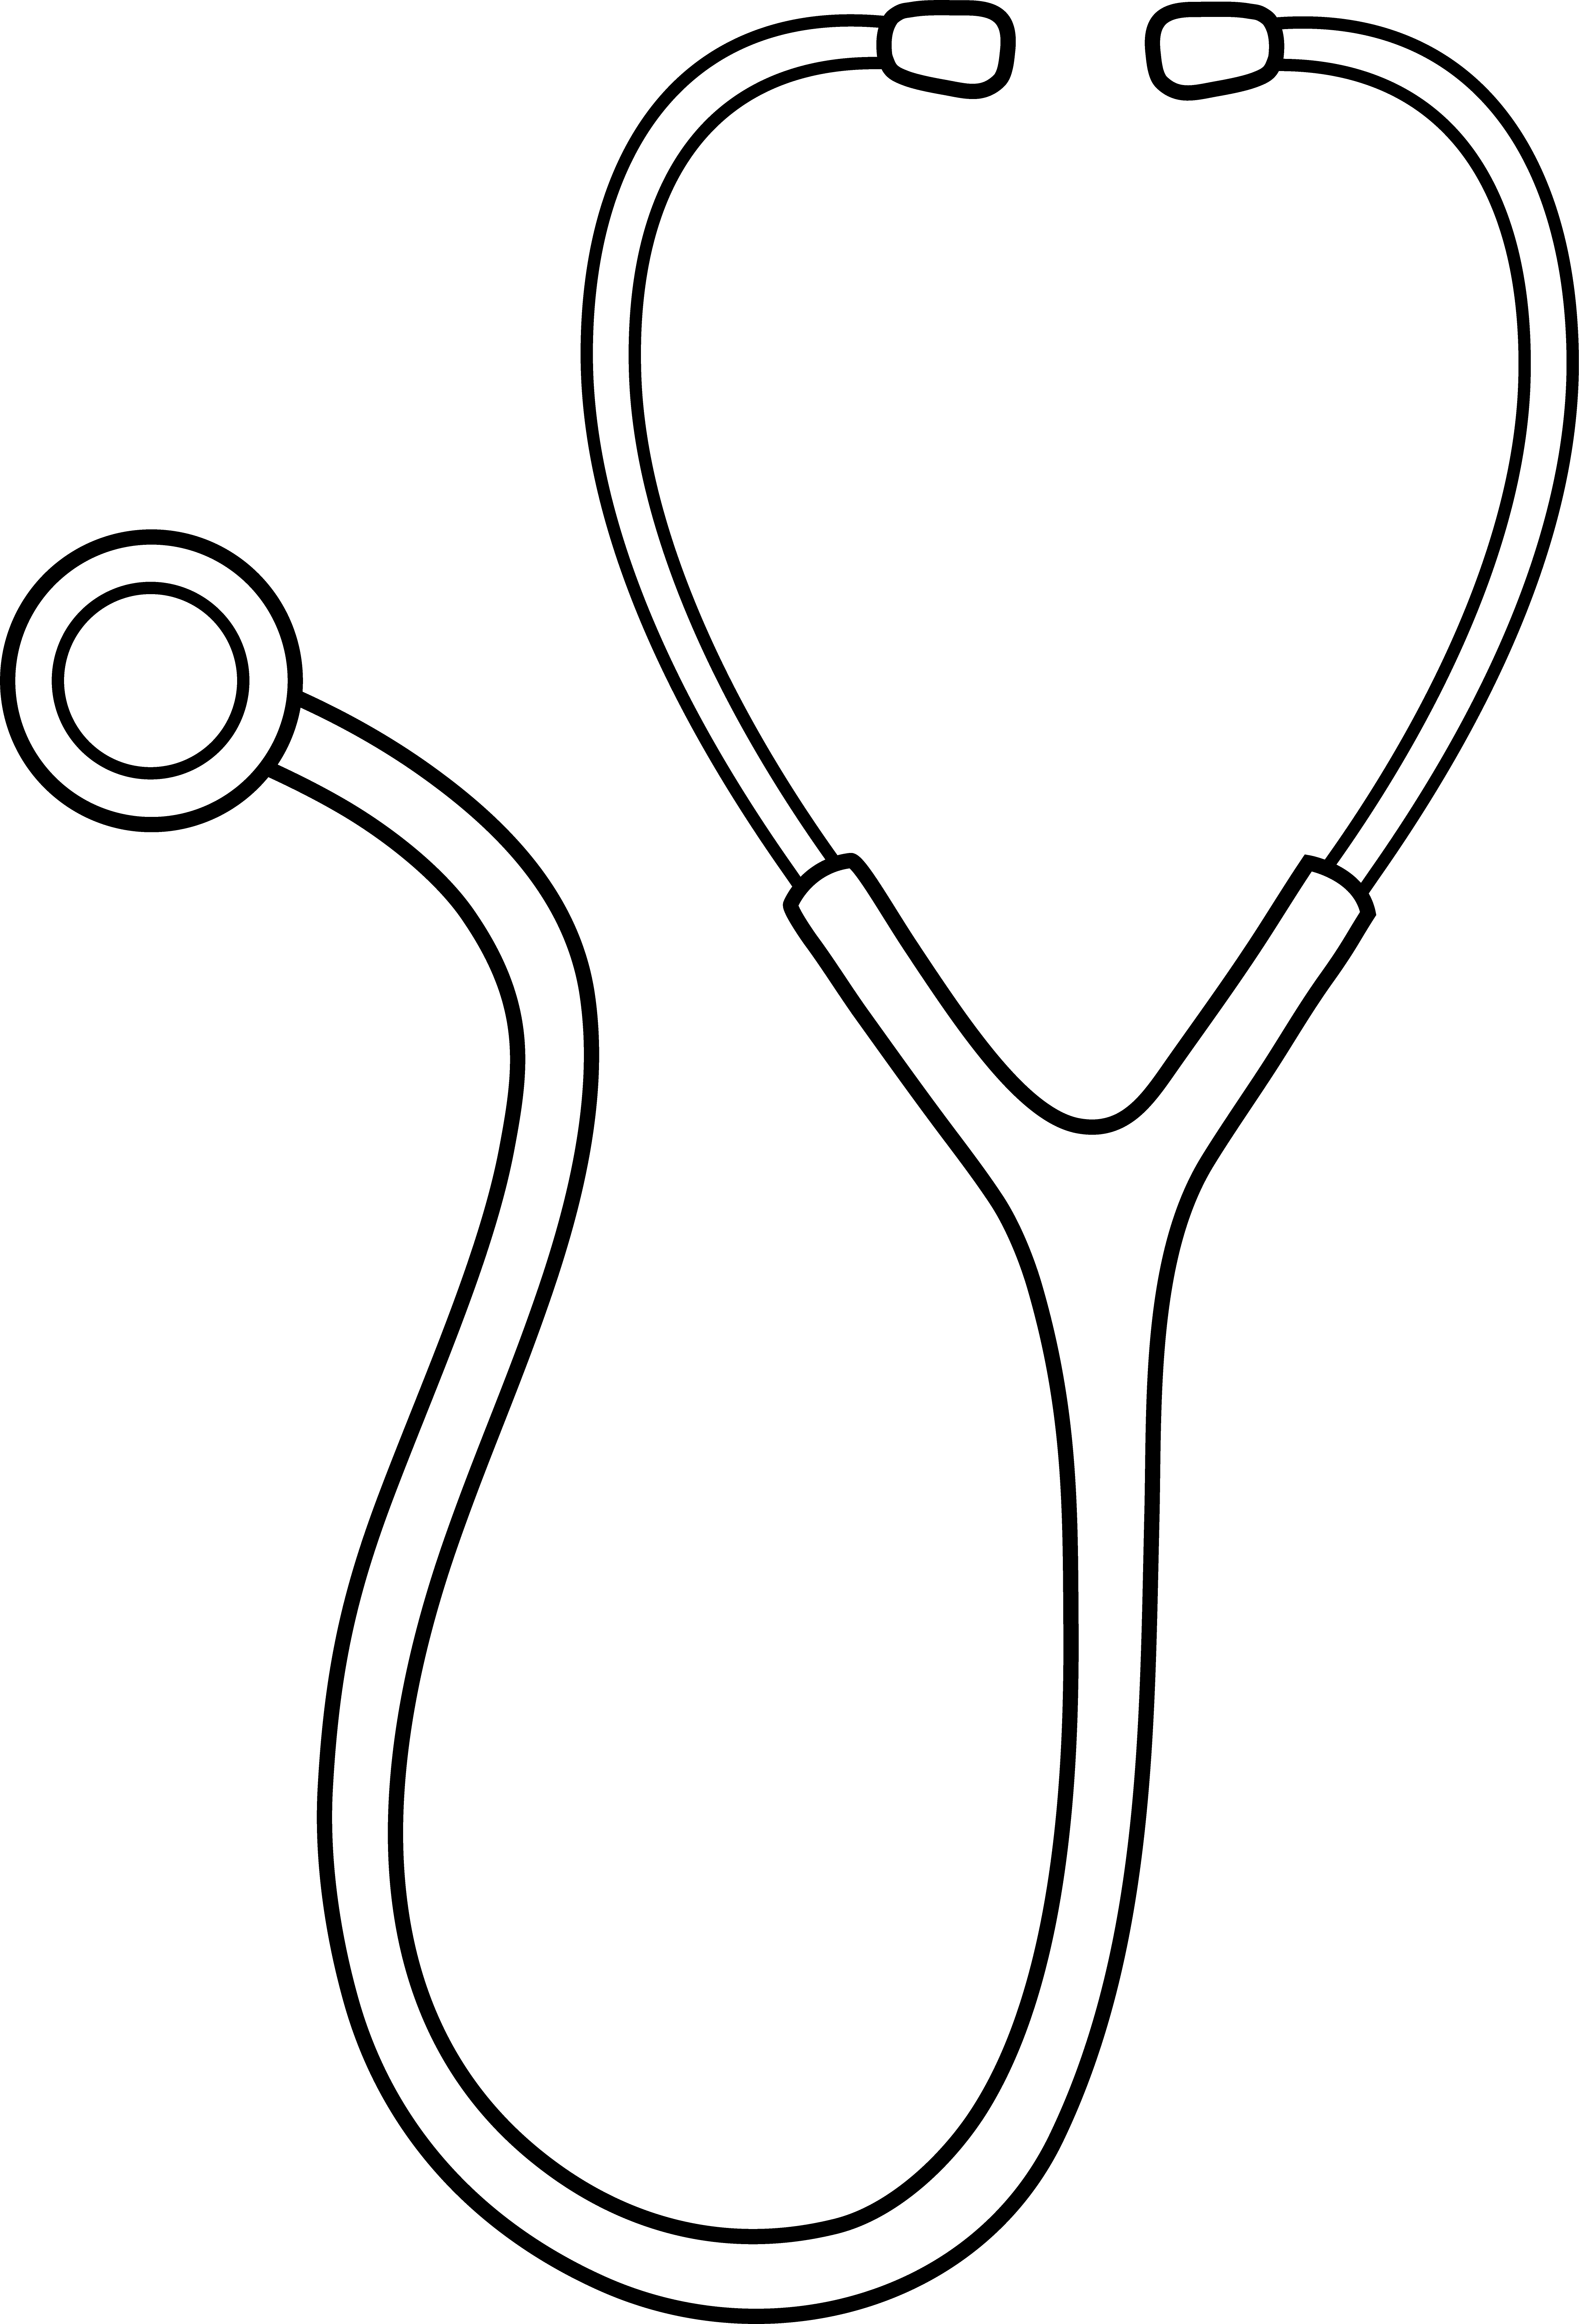 Stethoscope Clipart | Clipart library - Free Clipart Images